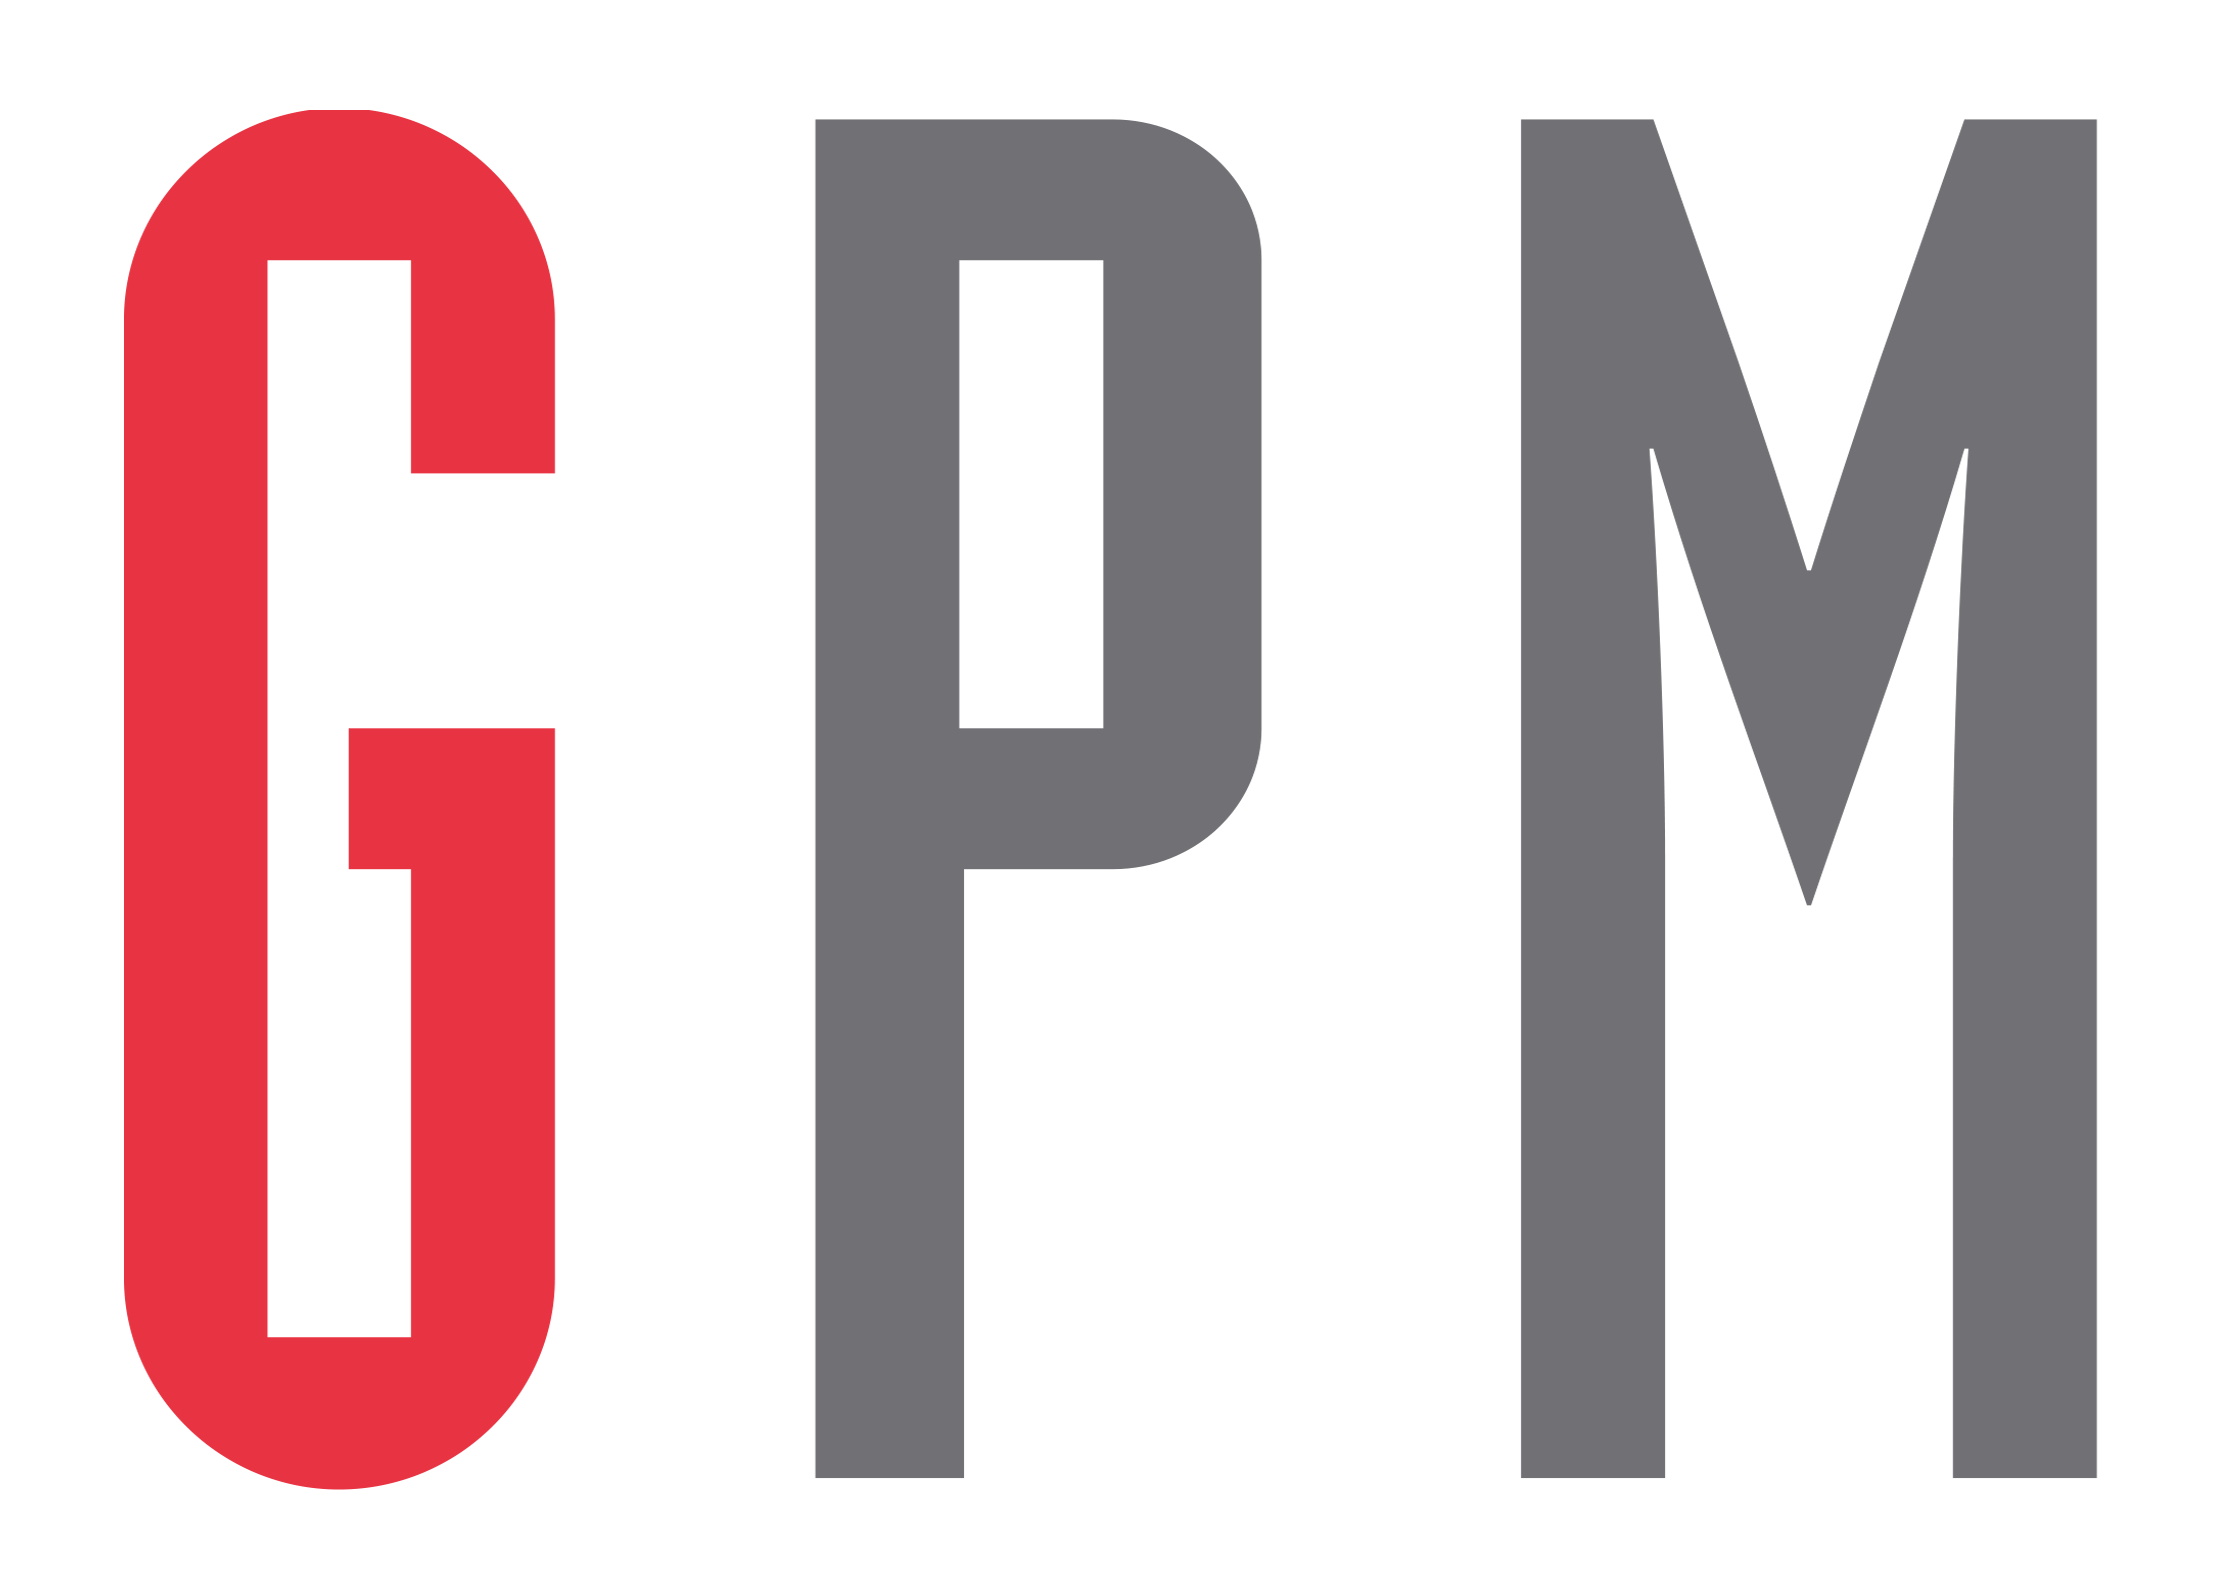 GPM - facility management